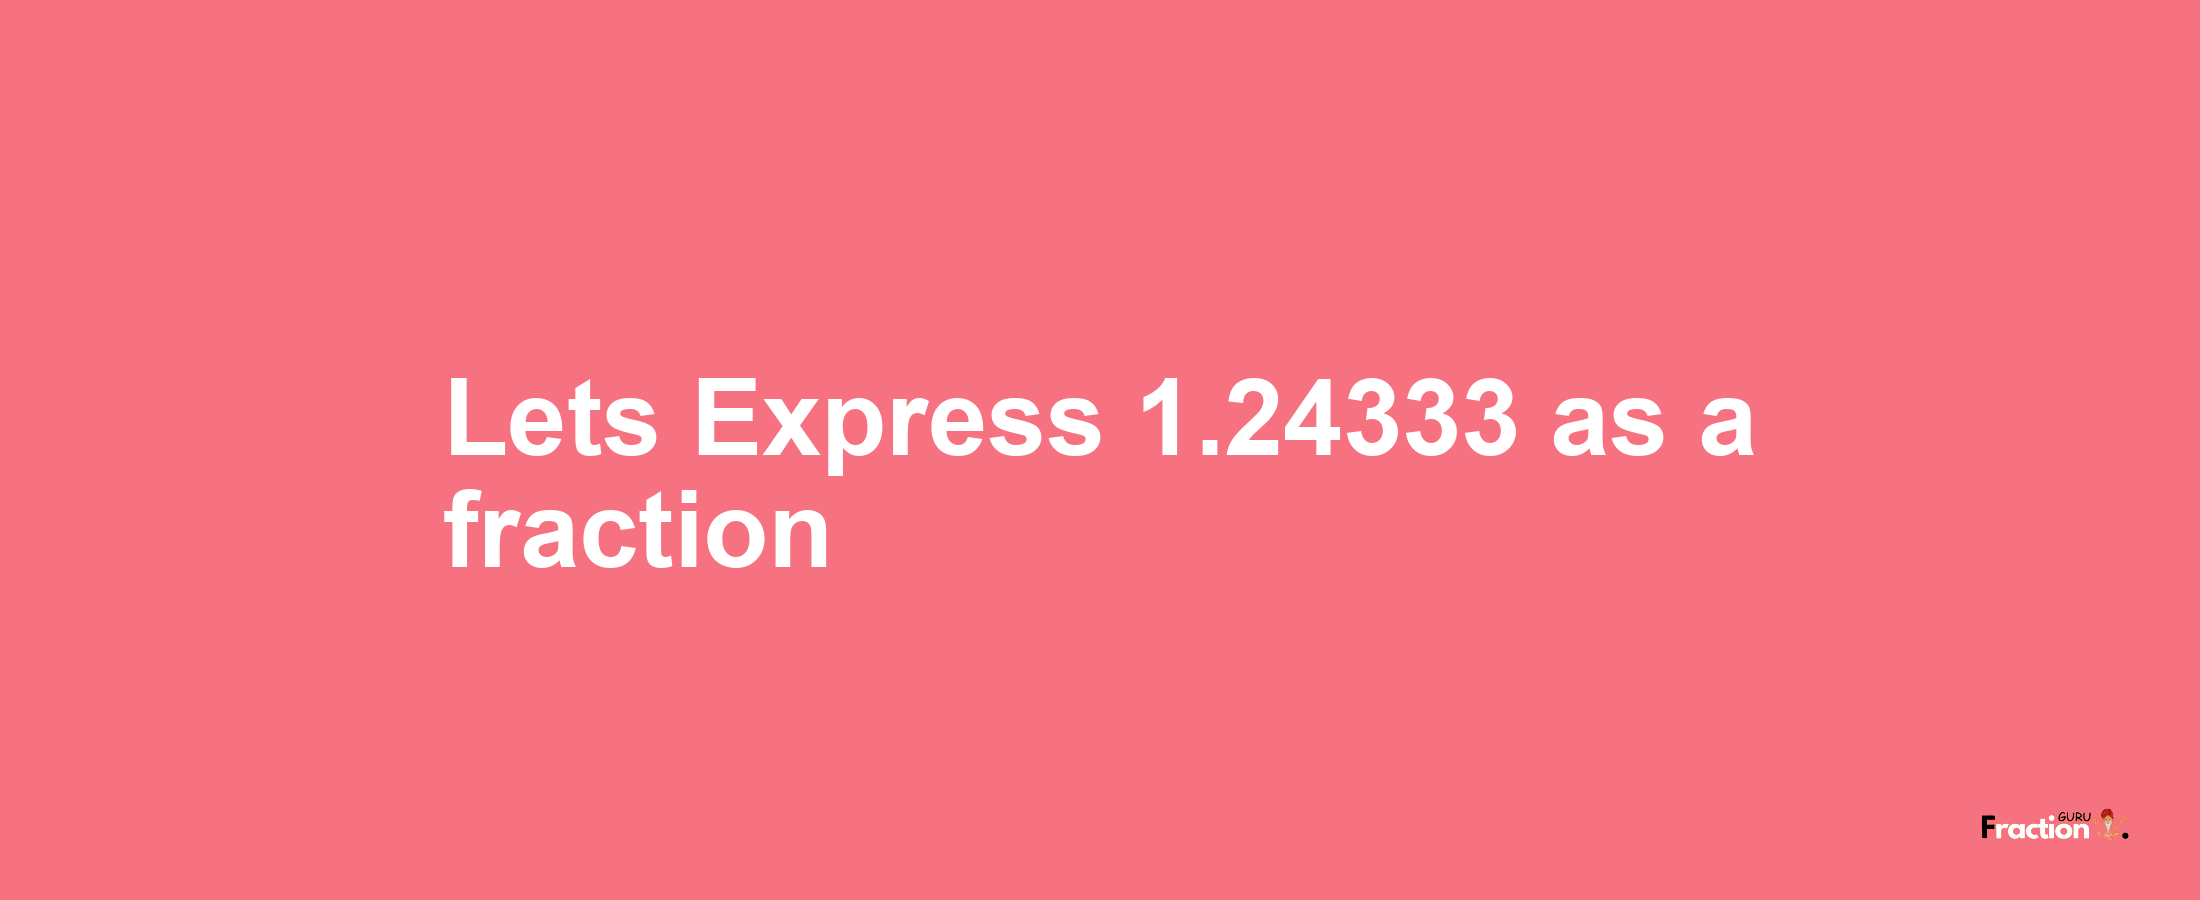 Lets Express 1.24333 as afraction